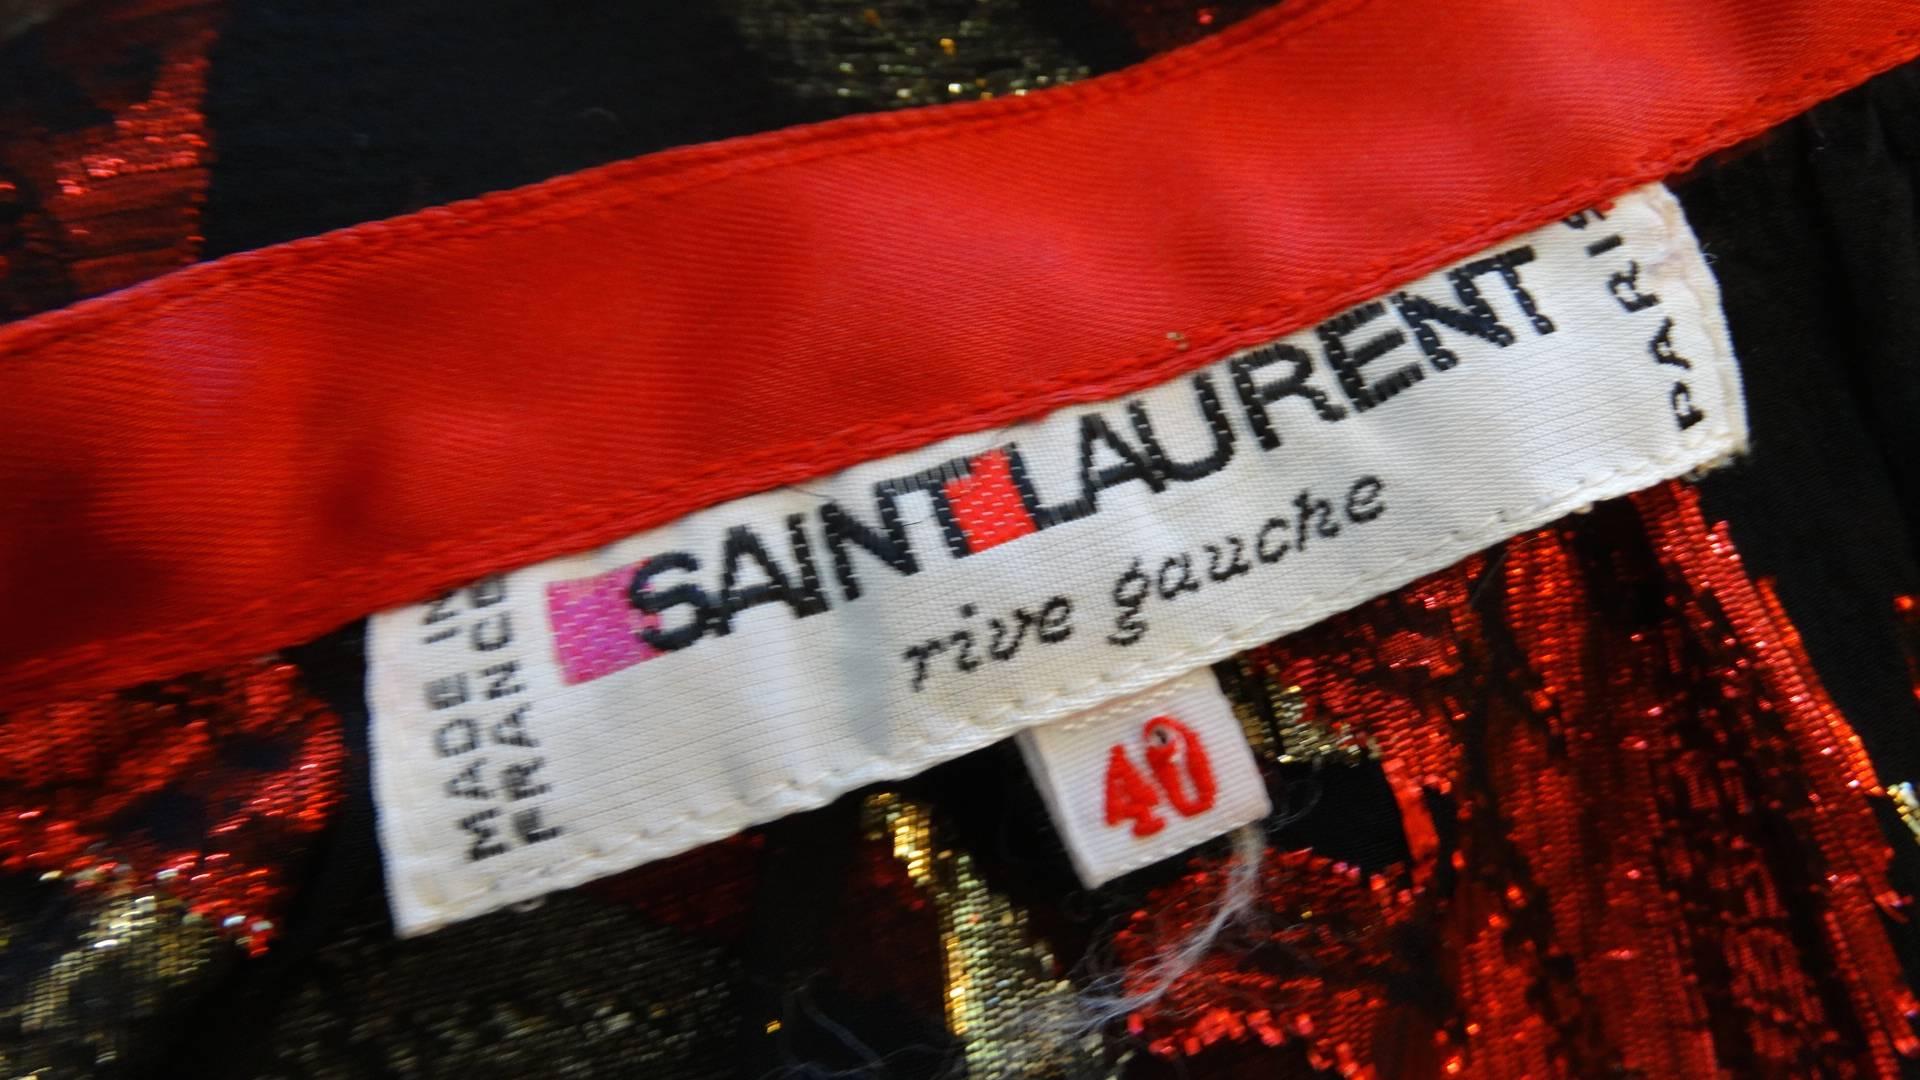 Gorgeous 1980s Saint Laurent Rive Gauche printed sheer skirt! Black sheer chiffon fabric with metallic red and gold flame-like pattern woven throughout. Red ribbon trim with excess at the waist, ties perfectly into a bow. Long, sexy slit up the left